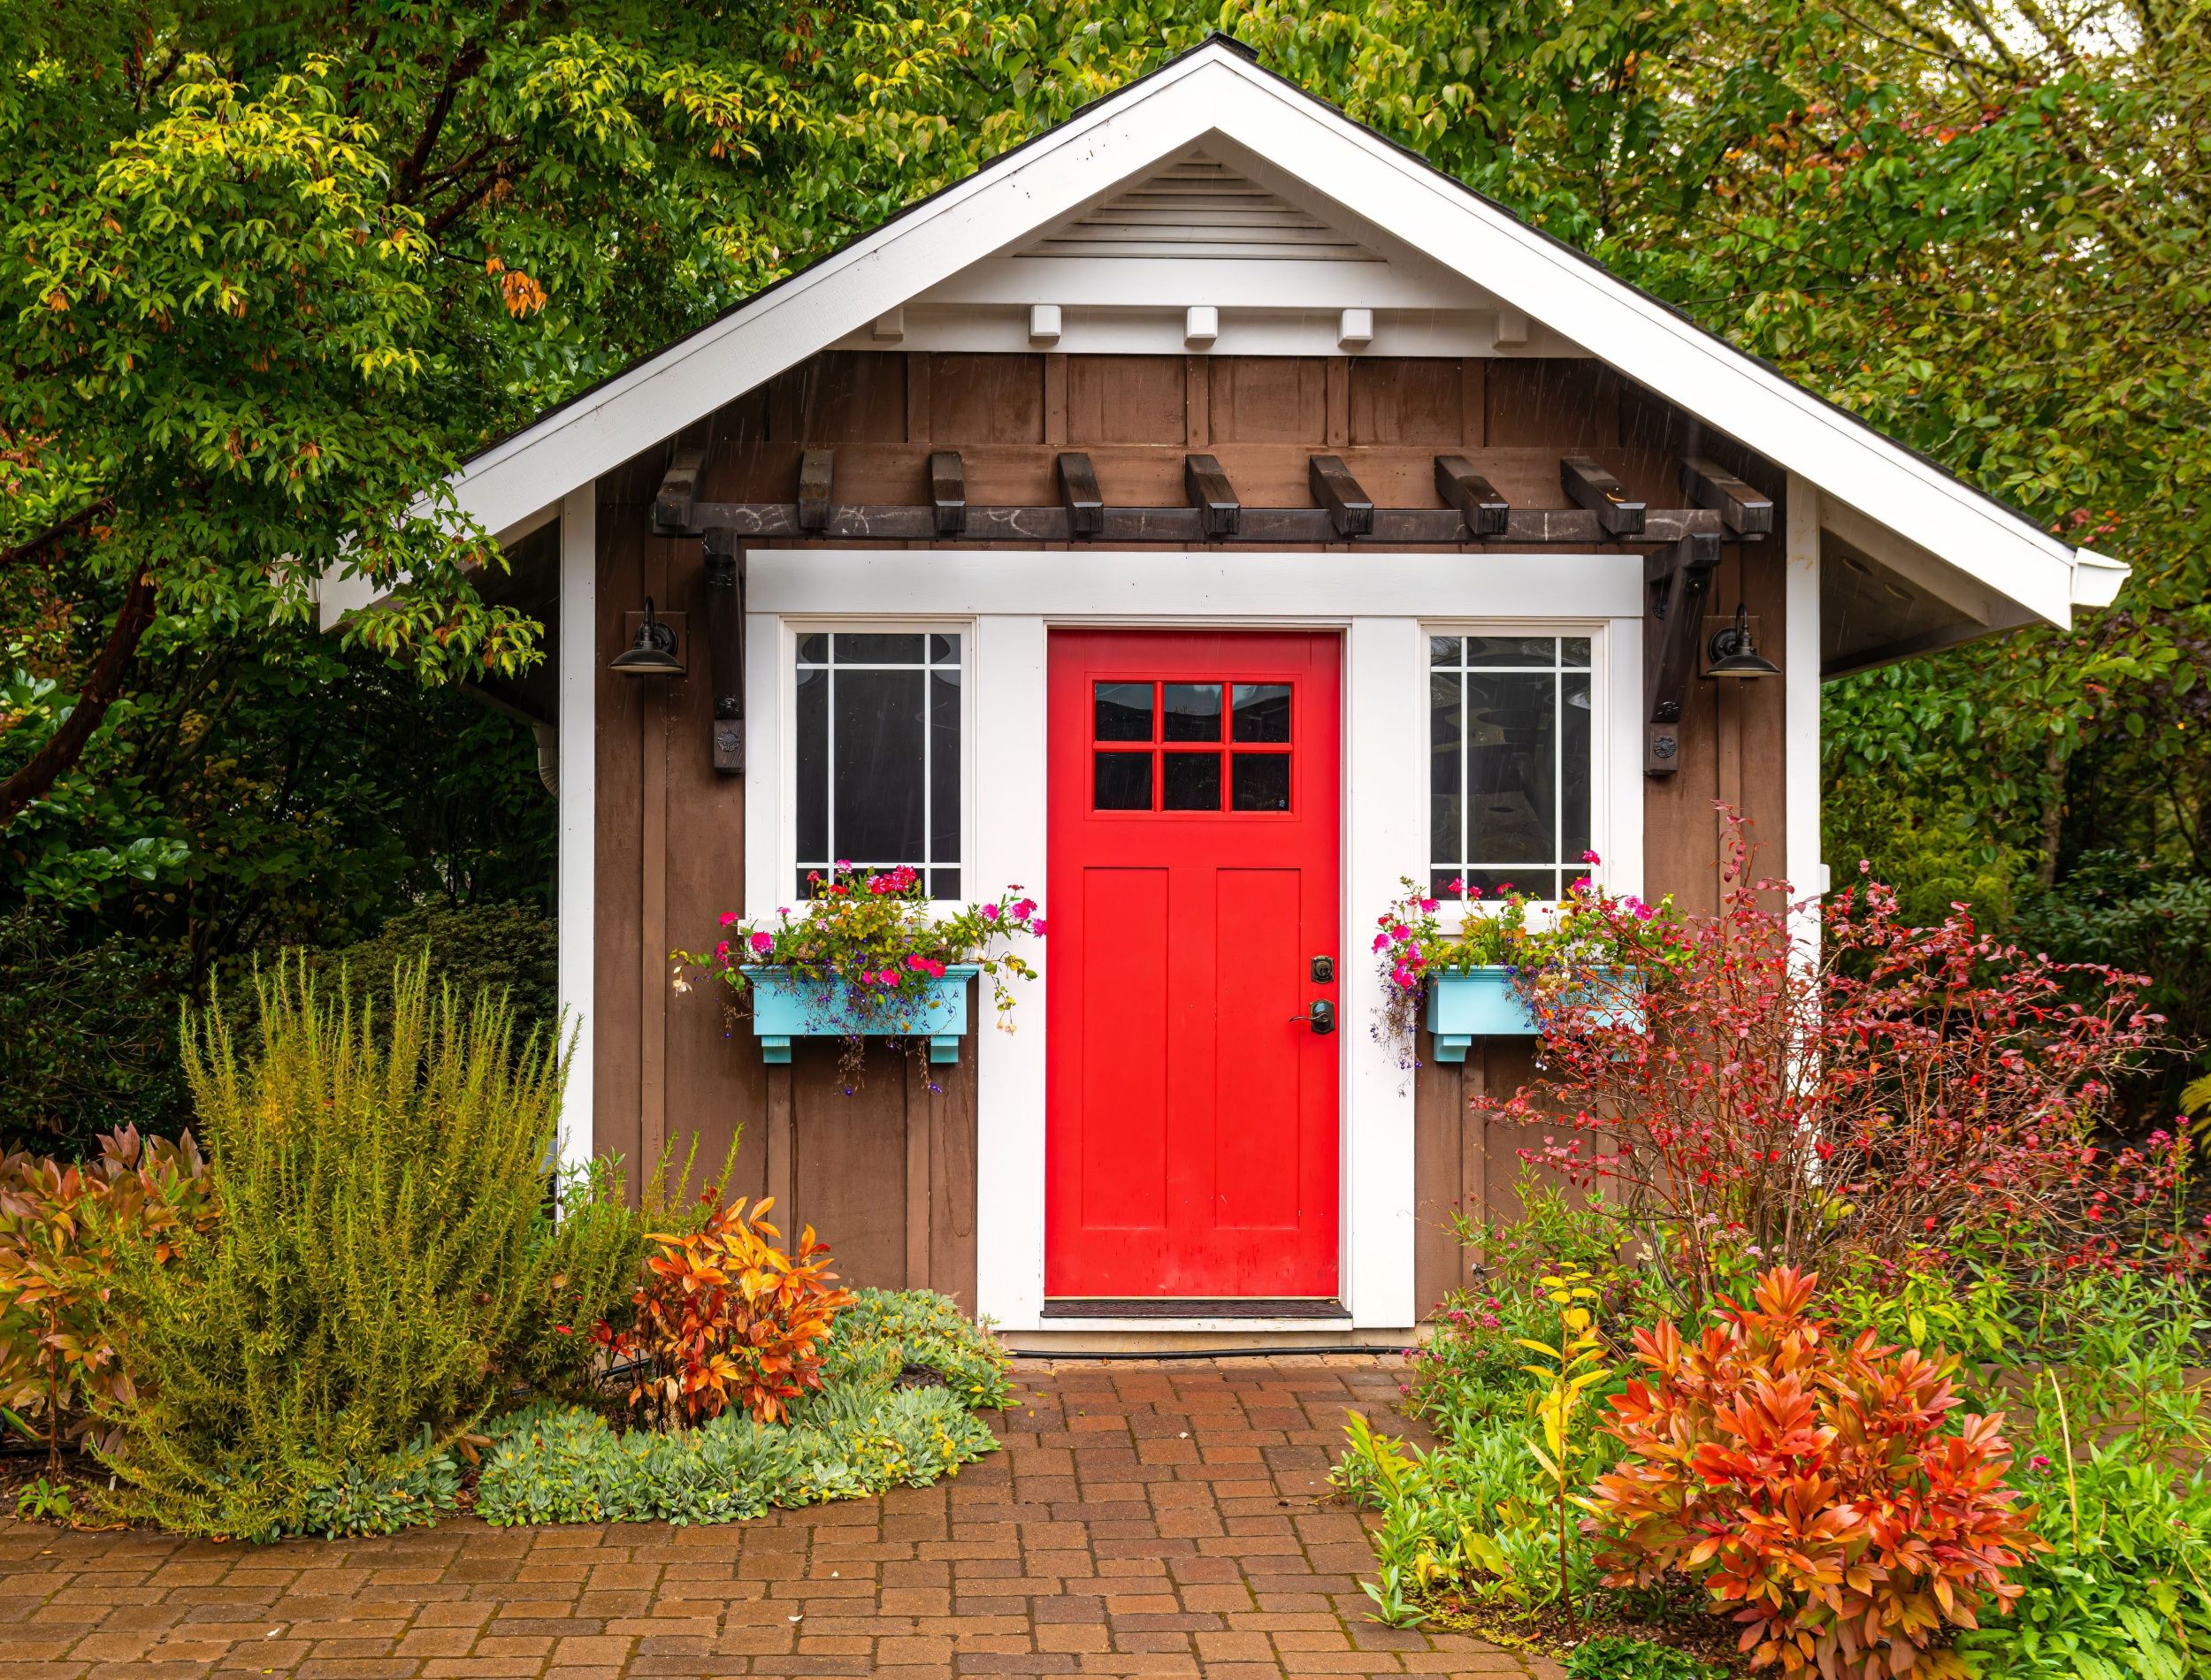 Small colorful wooden garden shed with a red door and window baskets of flowers.